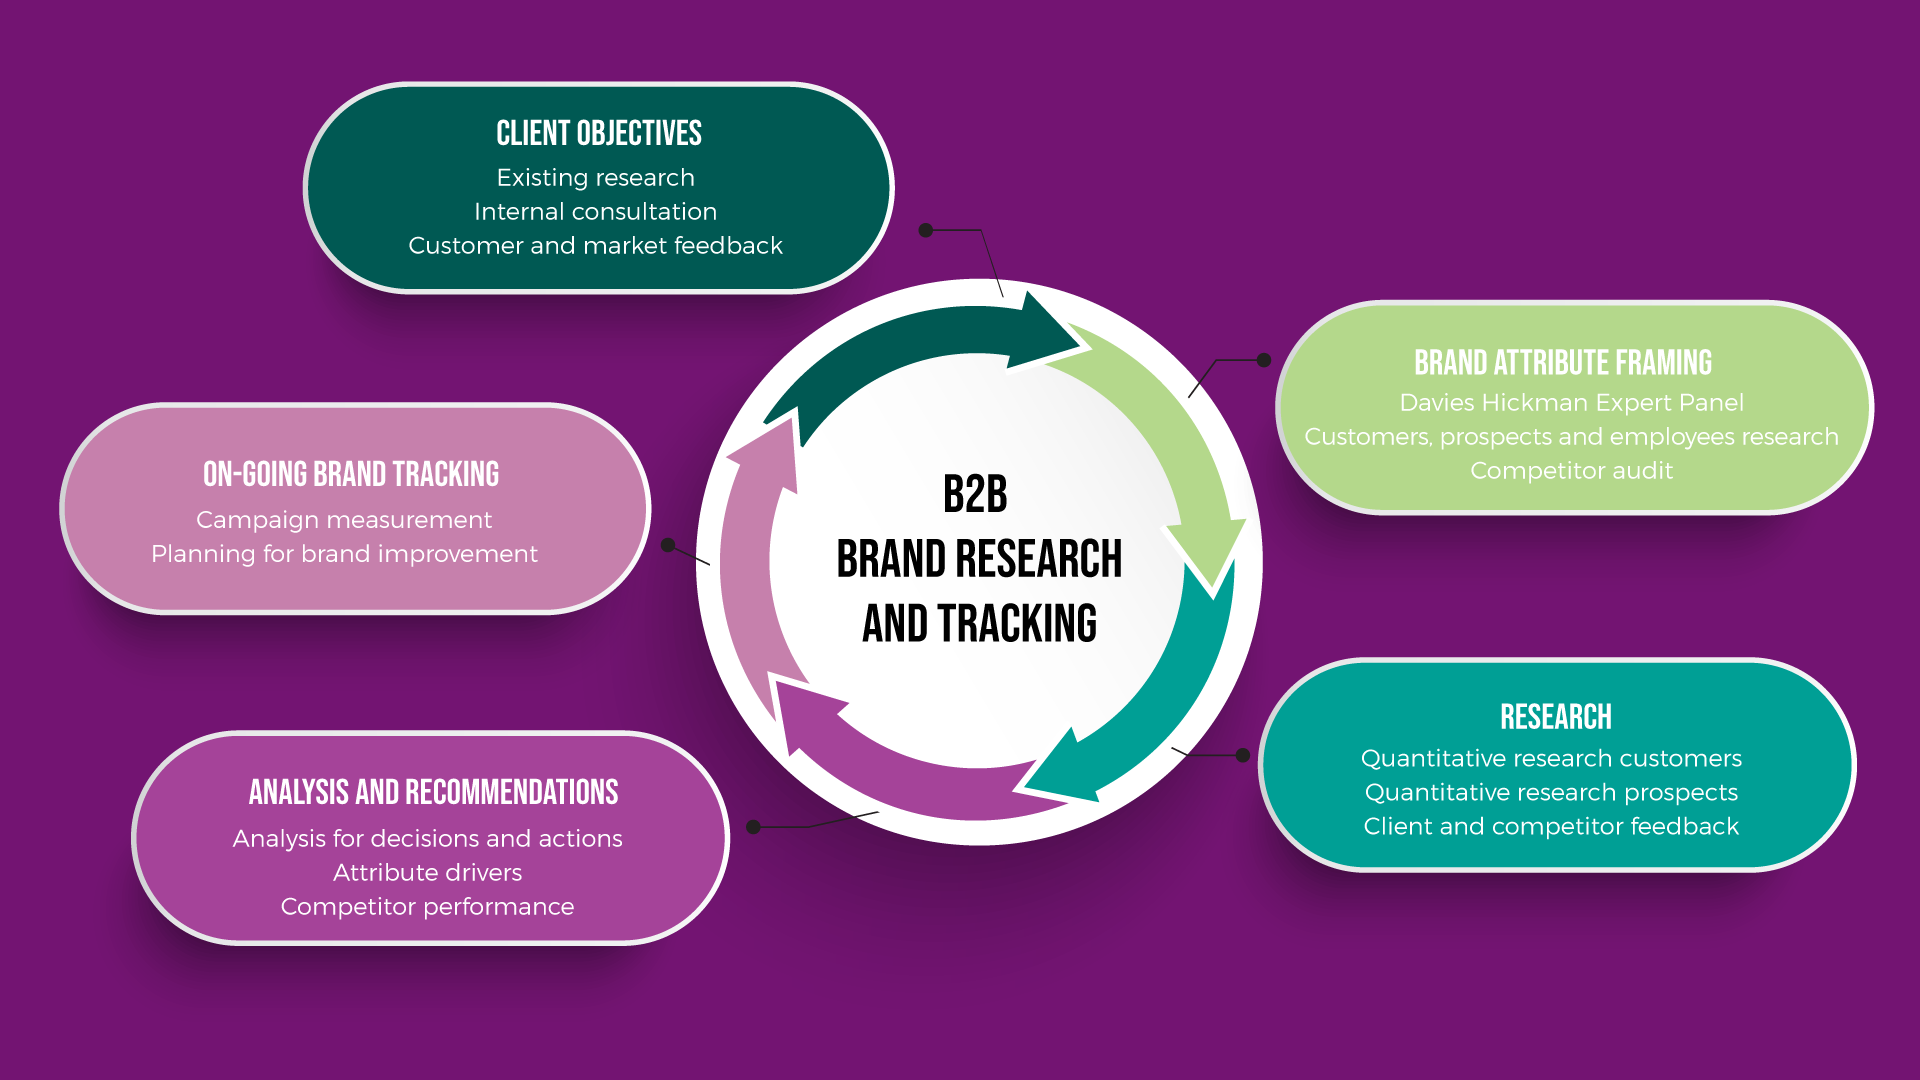 B2B brand research and tracking